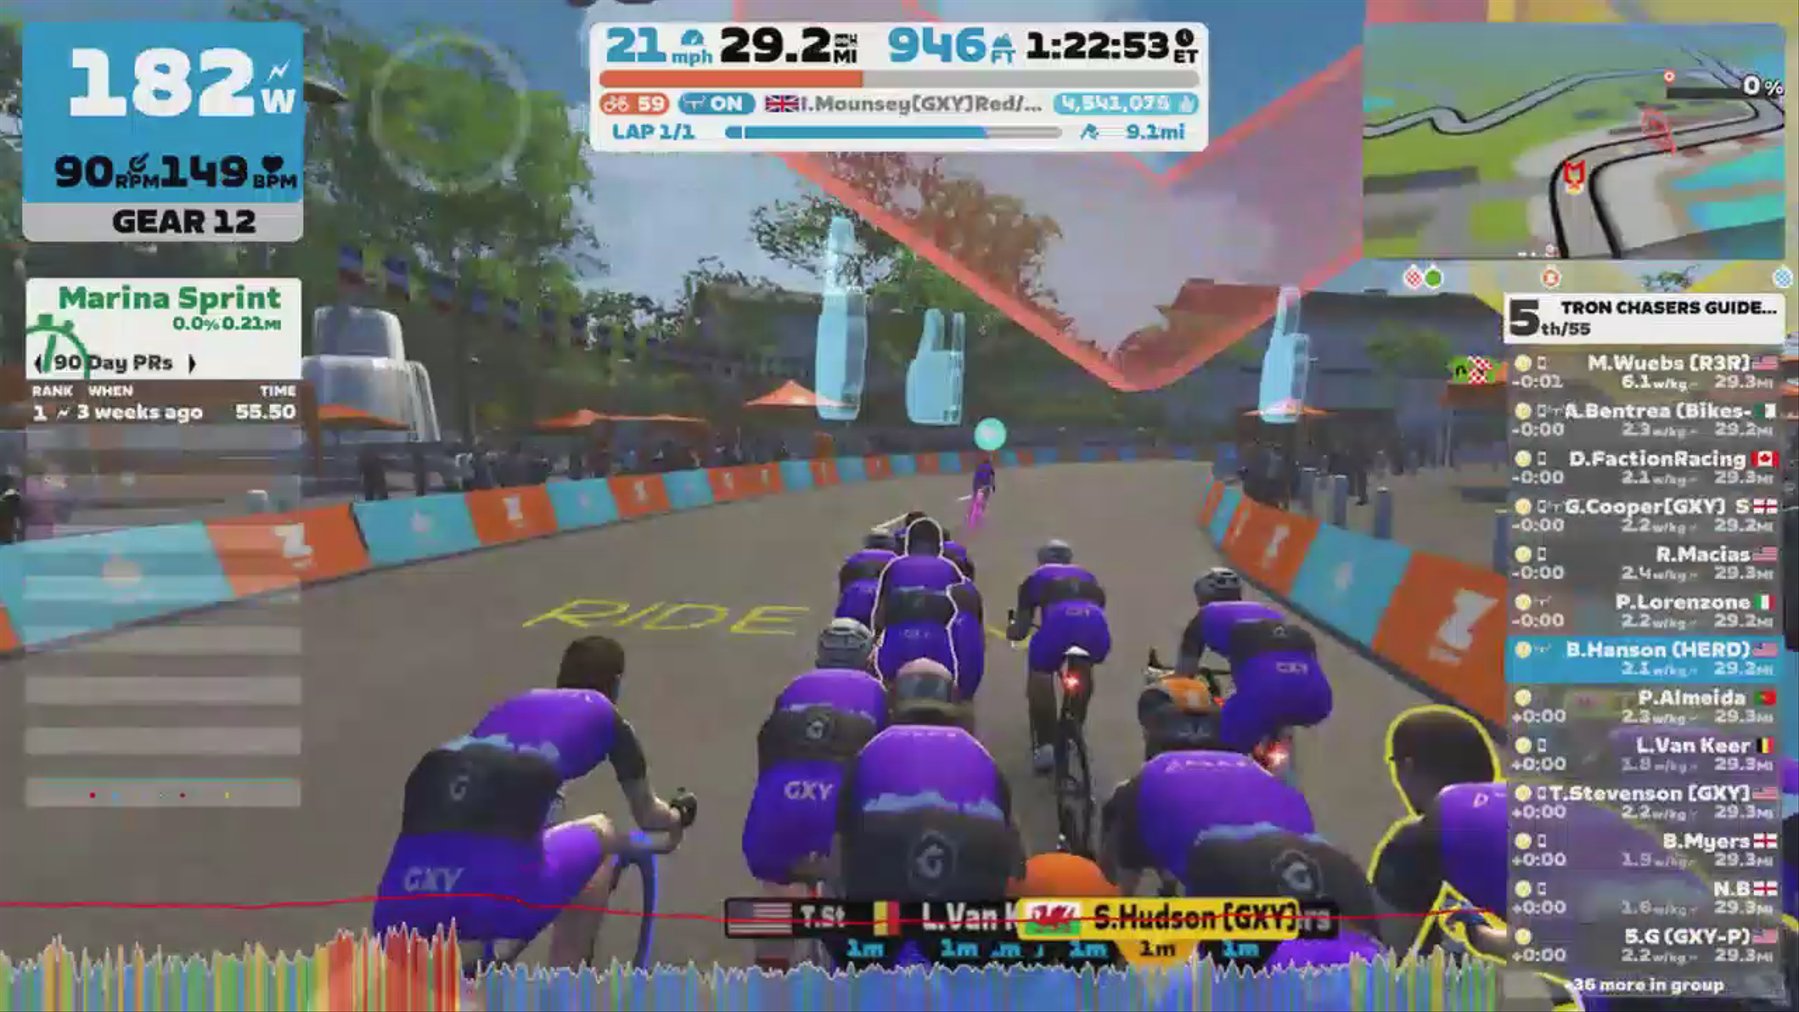 Zwift - Group Ride: TRON CHASERS GUIDE TO THE GALAXY [1.8-2.4 WKG] CAT D (D) on Petit Boucle in France